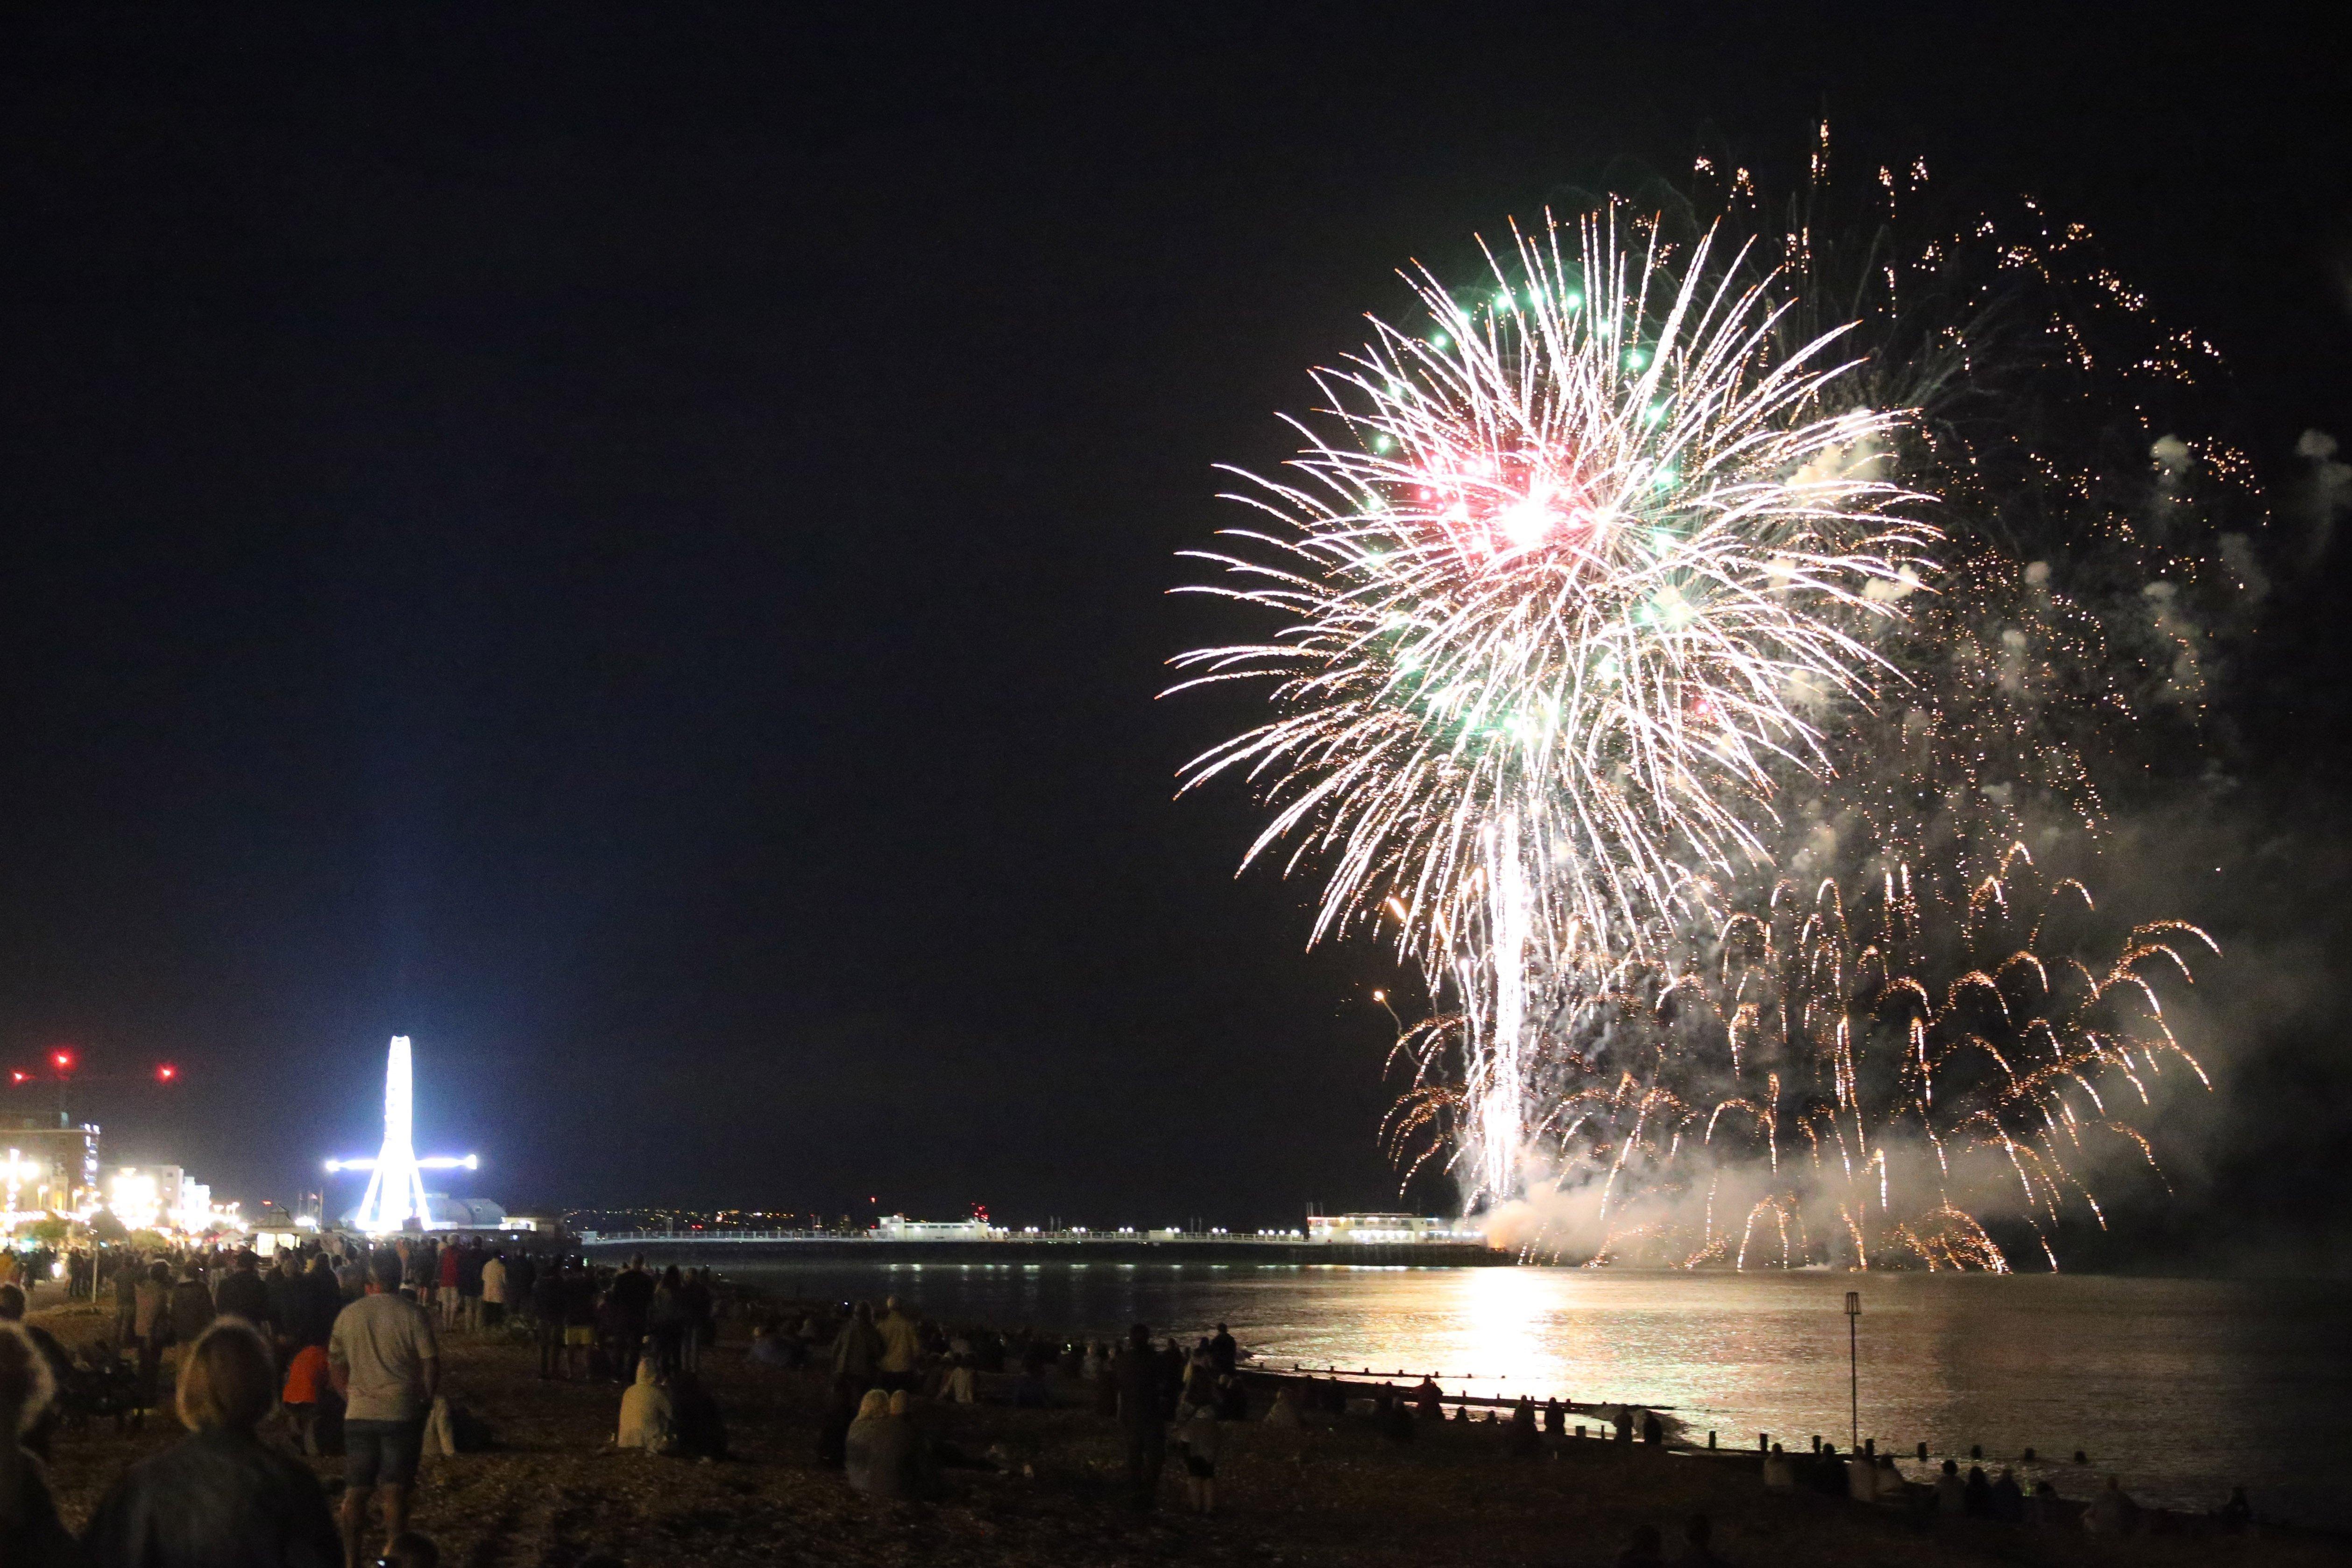 Worthing Lions' firework display takes place on Thursday, November 5